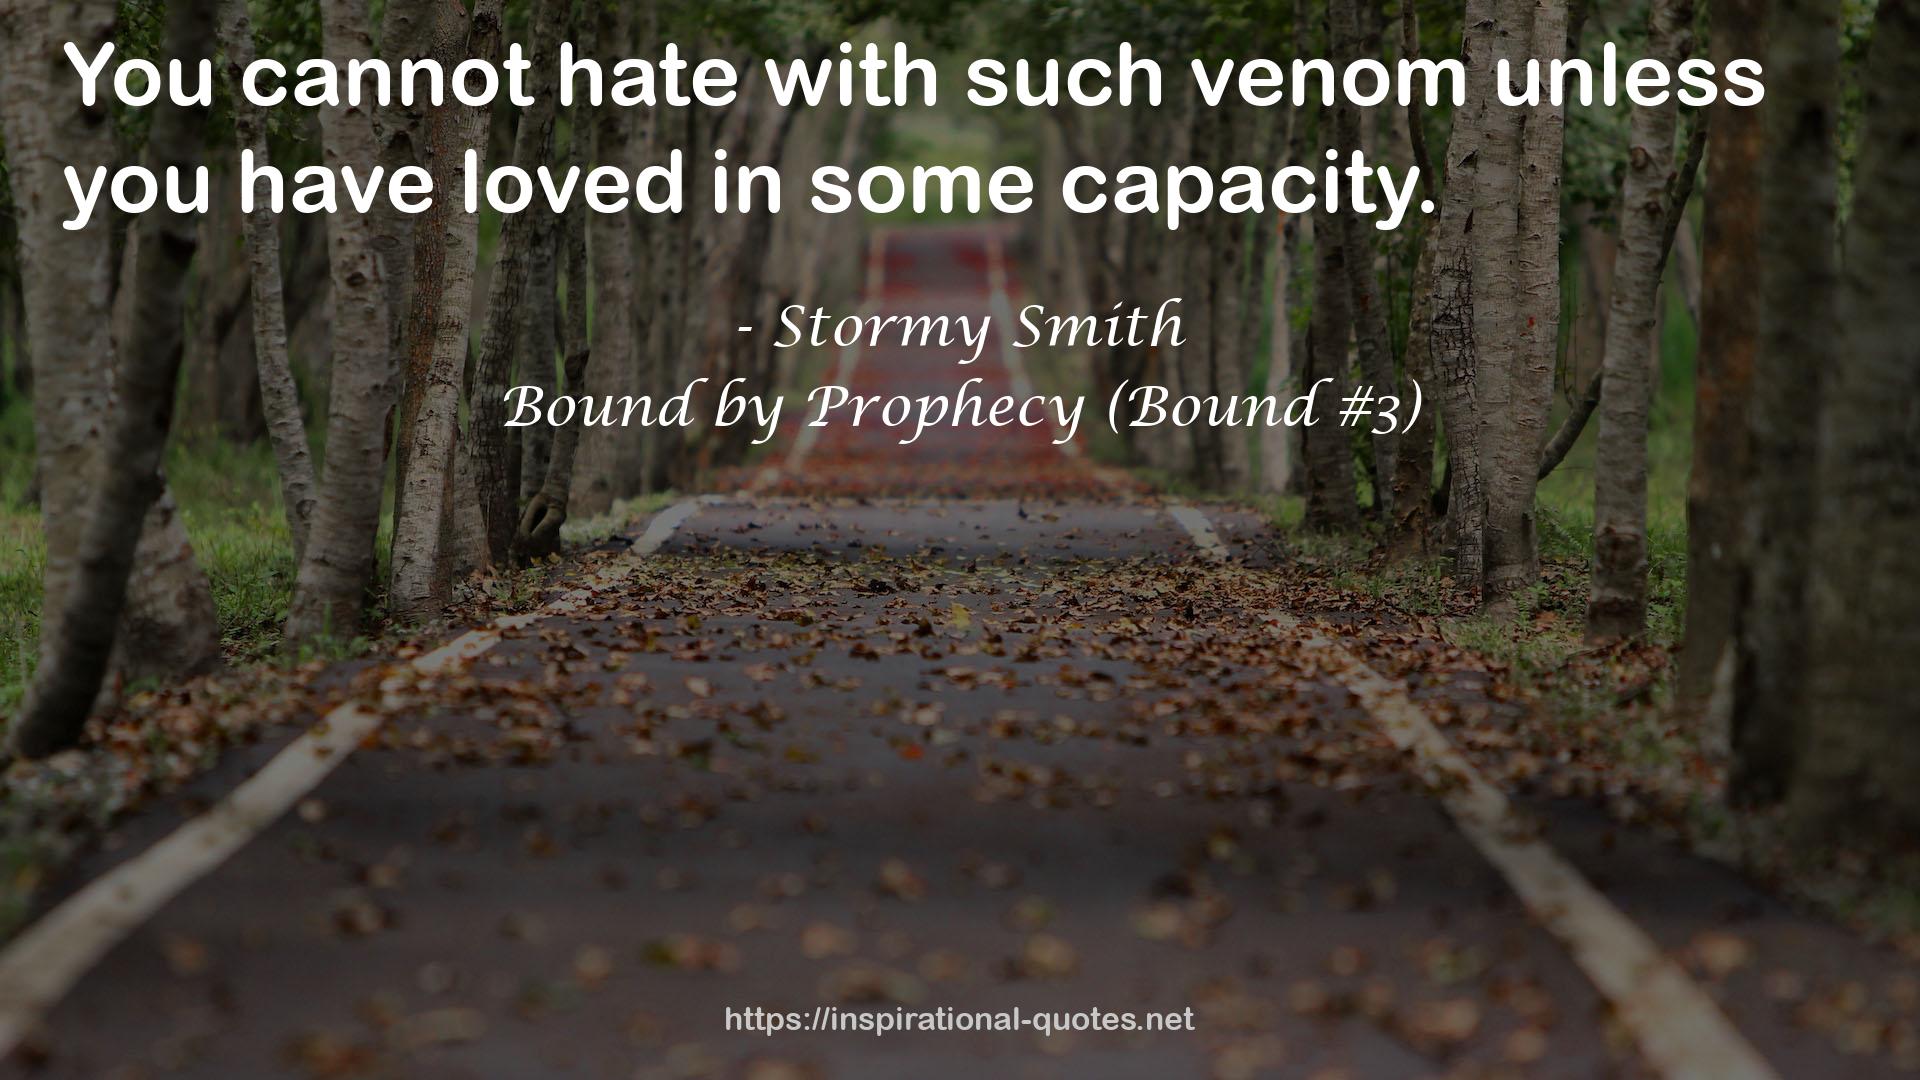 Bound by Prophecy (Bound #3) QUOTES